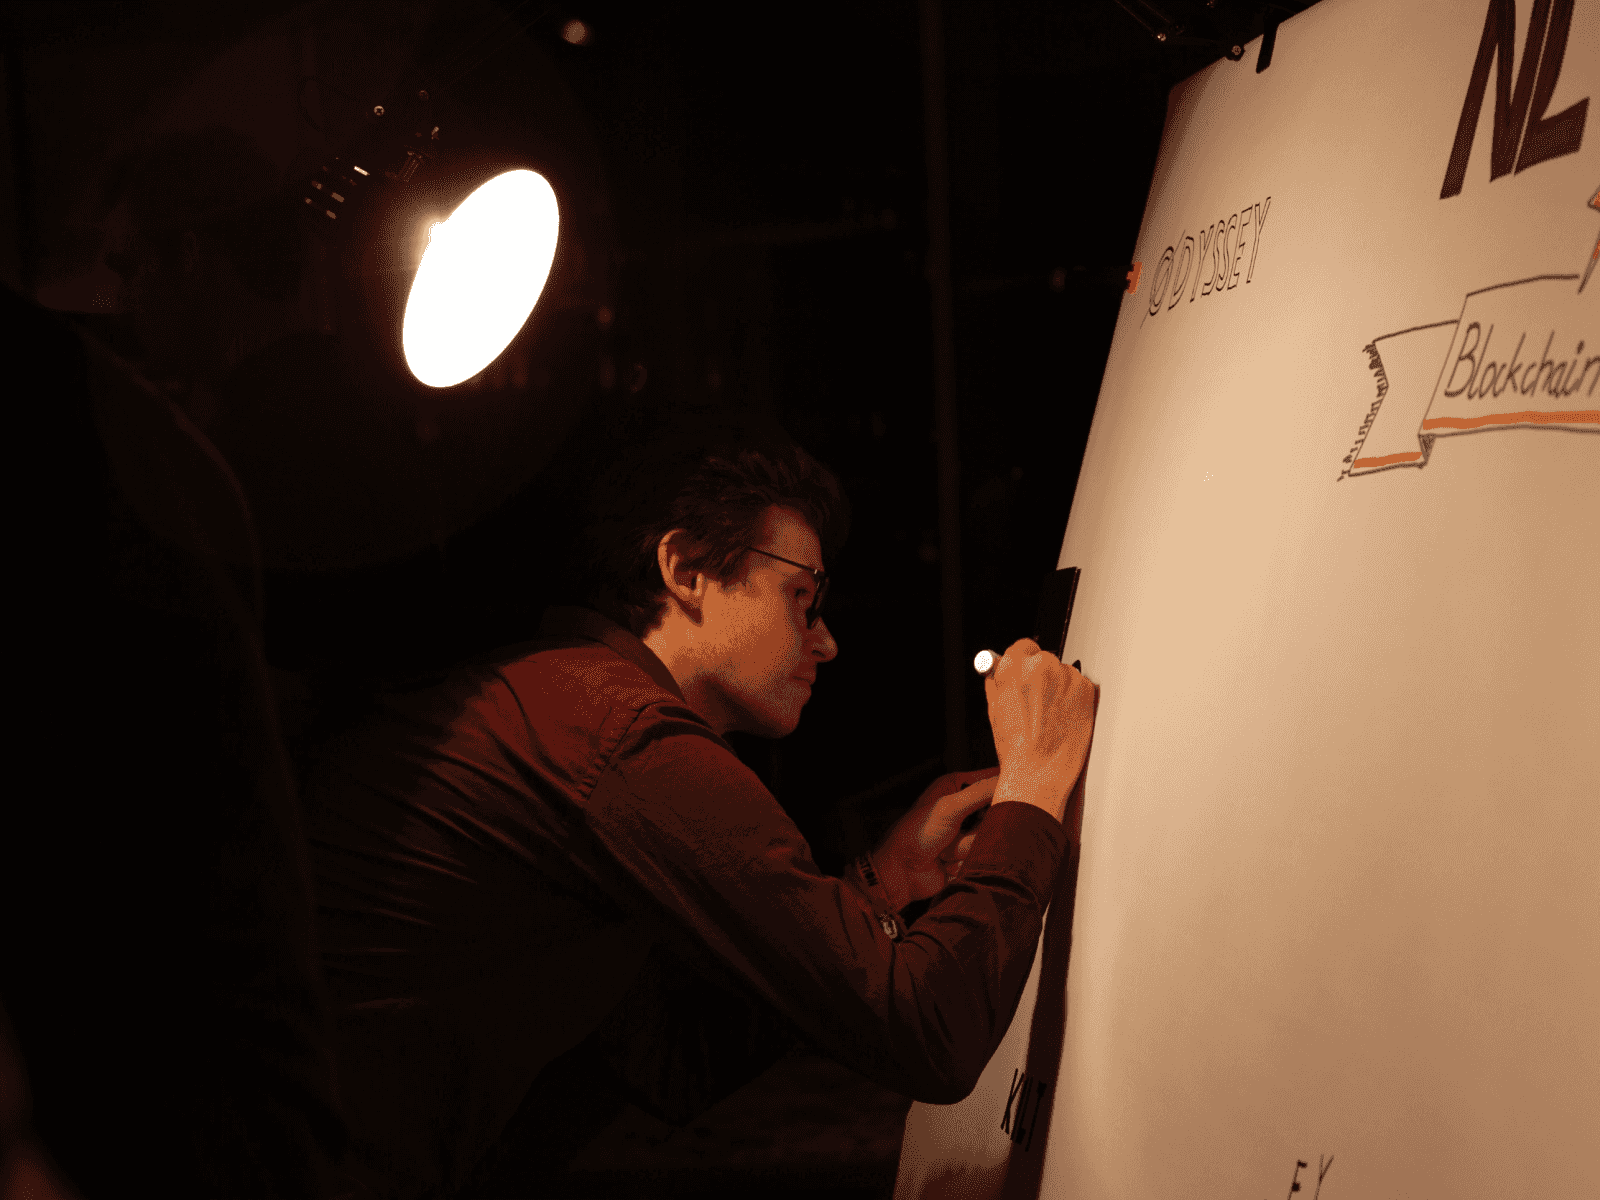 Andre draws on canvas